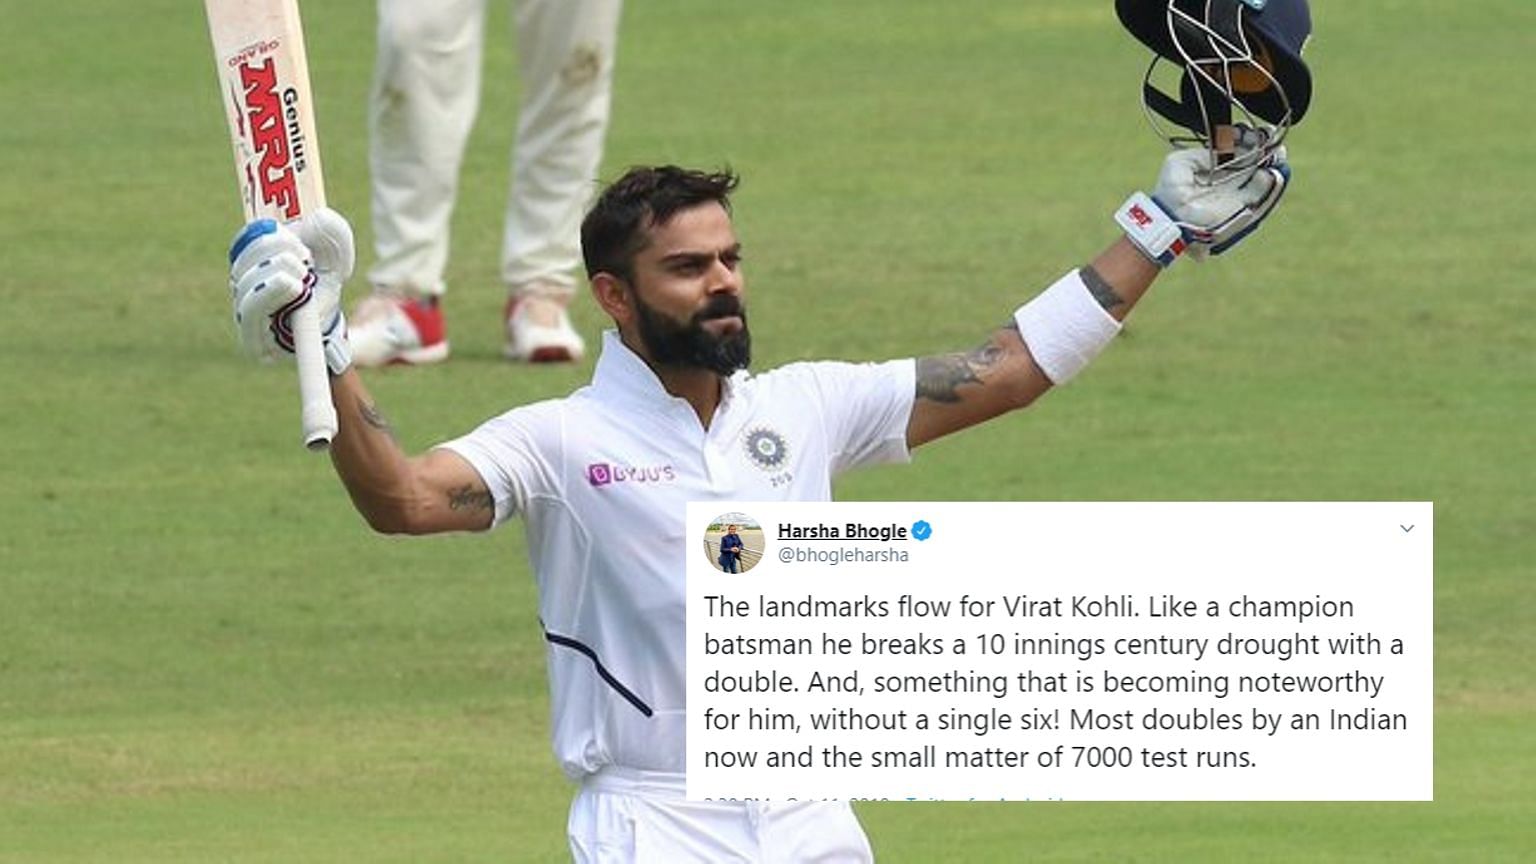 Twitterati lauded Kohli’s knock with cricketing legends and experts heaping praise on the Indian skipper.